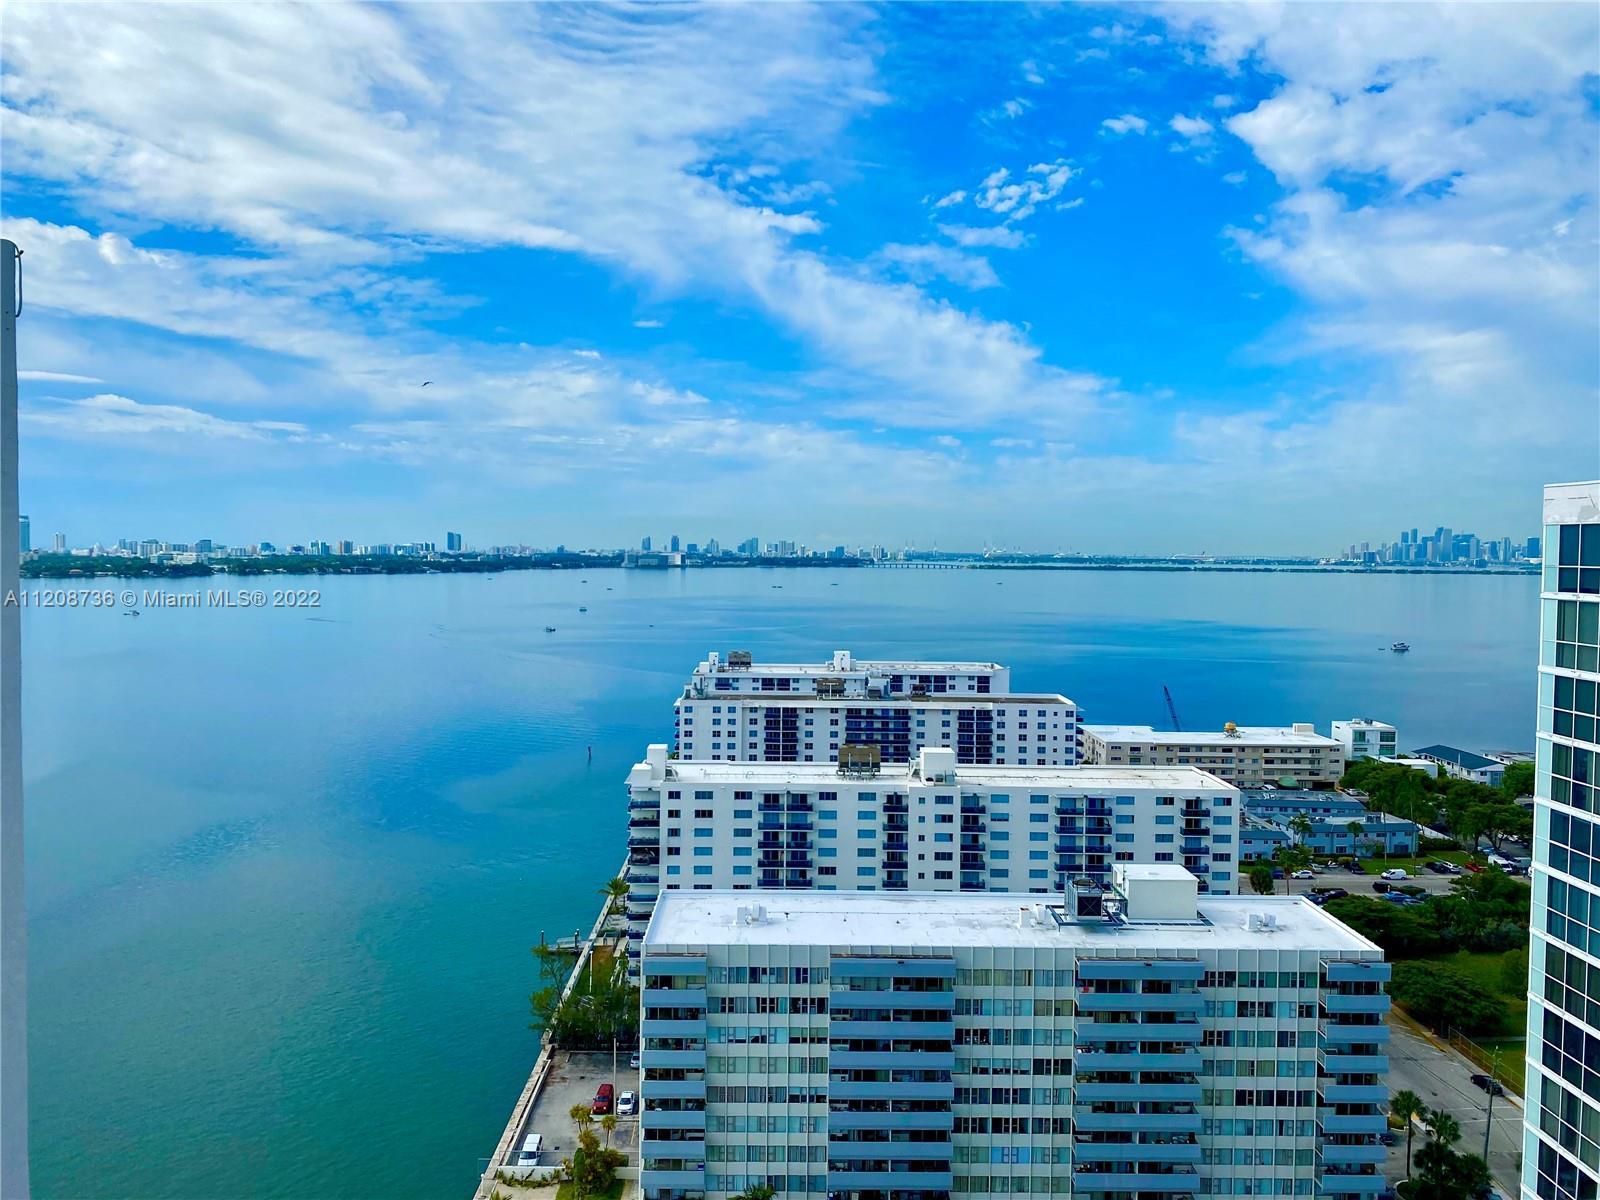 SPACIOUS CORNER PENTHOUSE UNIT WITH VIEWS OF SOUTH BEACH AND BRICKELL.
TENANT'S LEASE EXPIRES THIS 